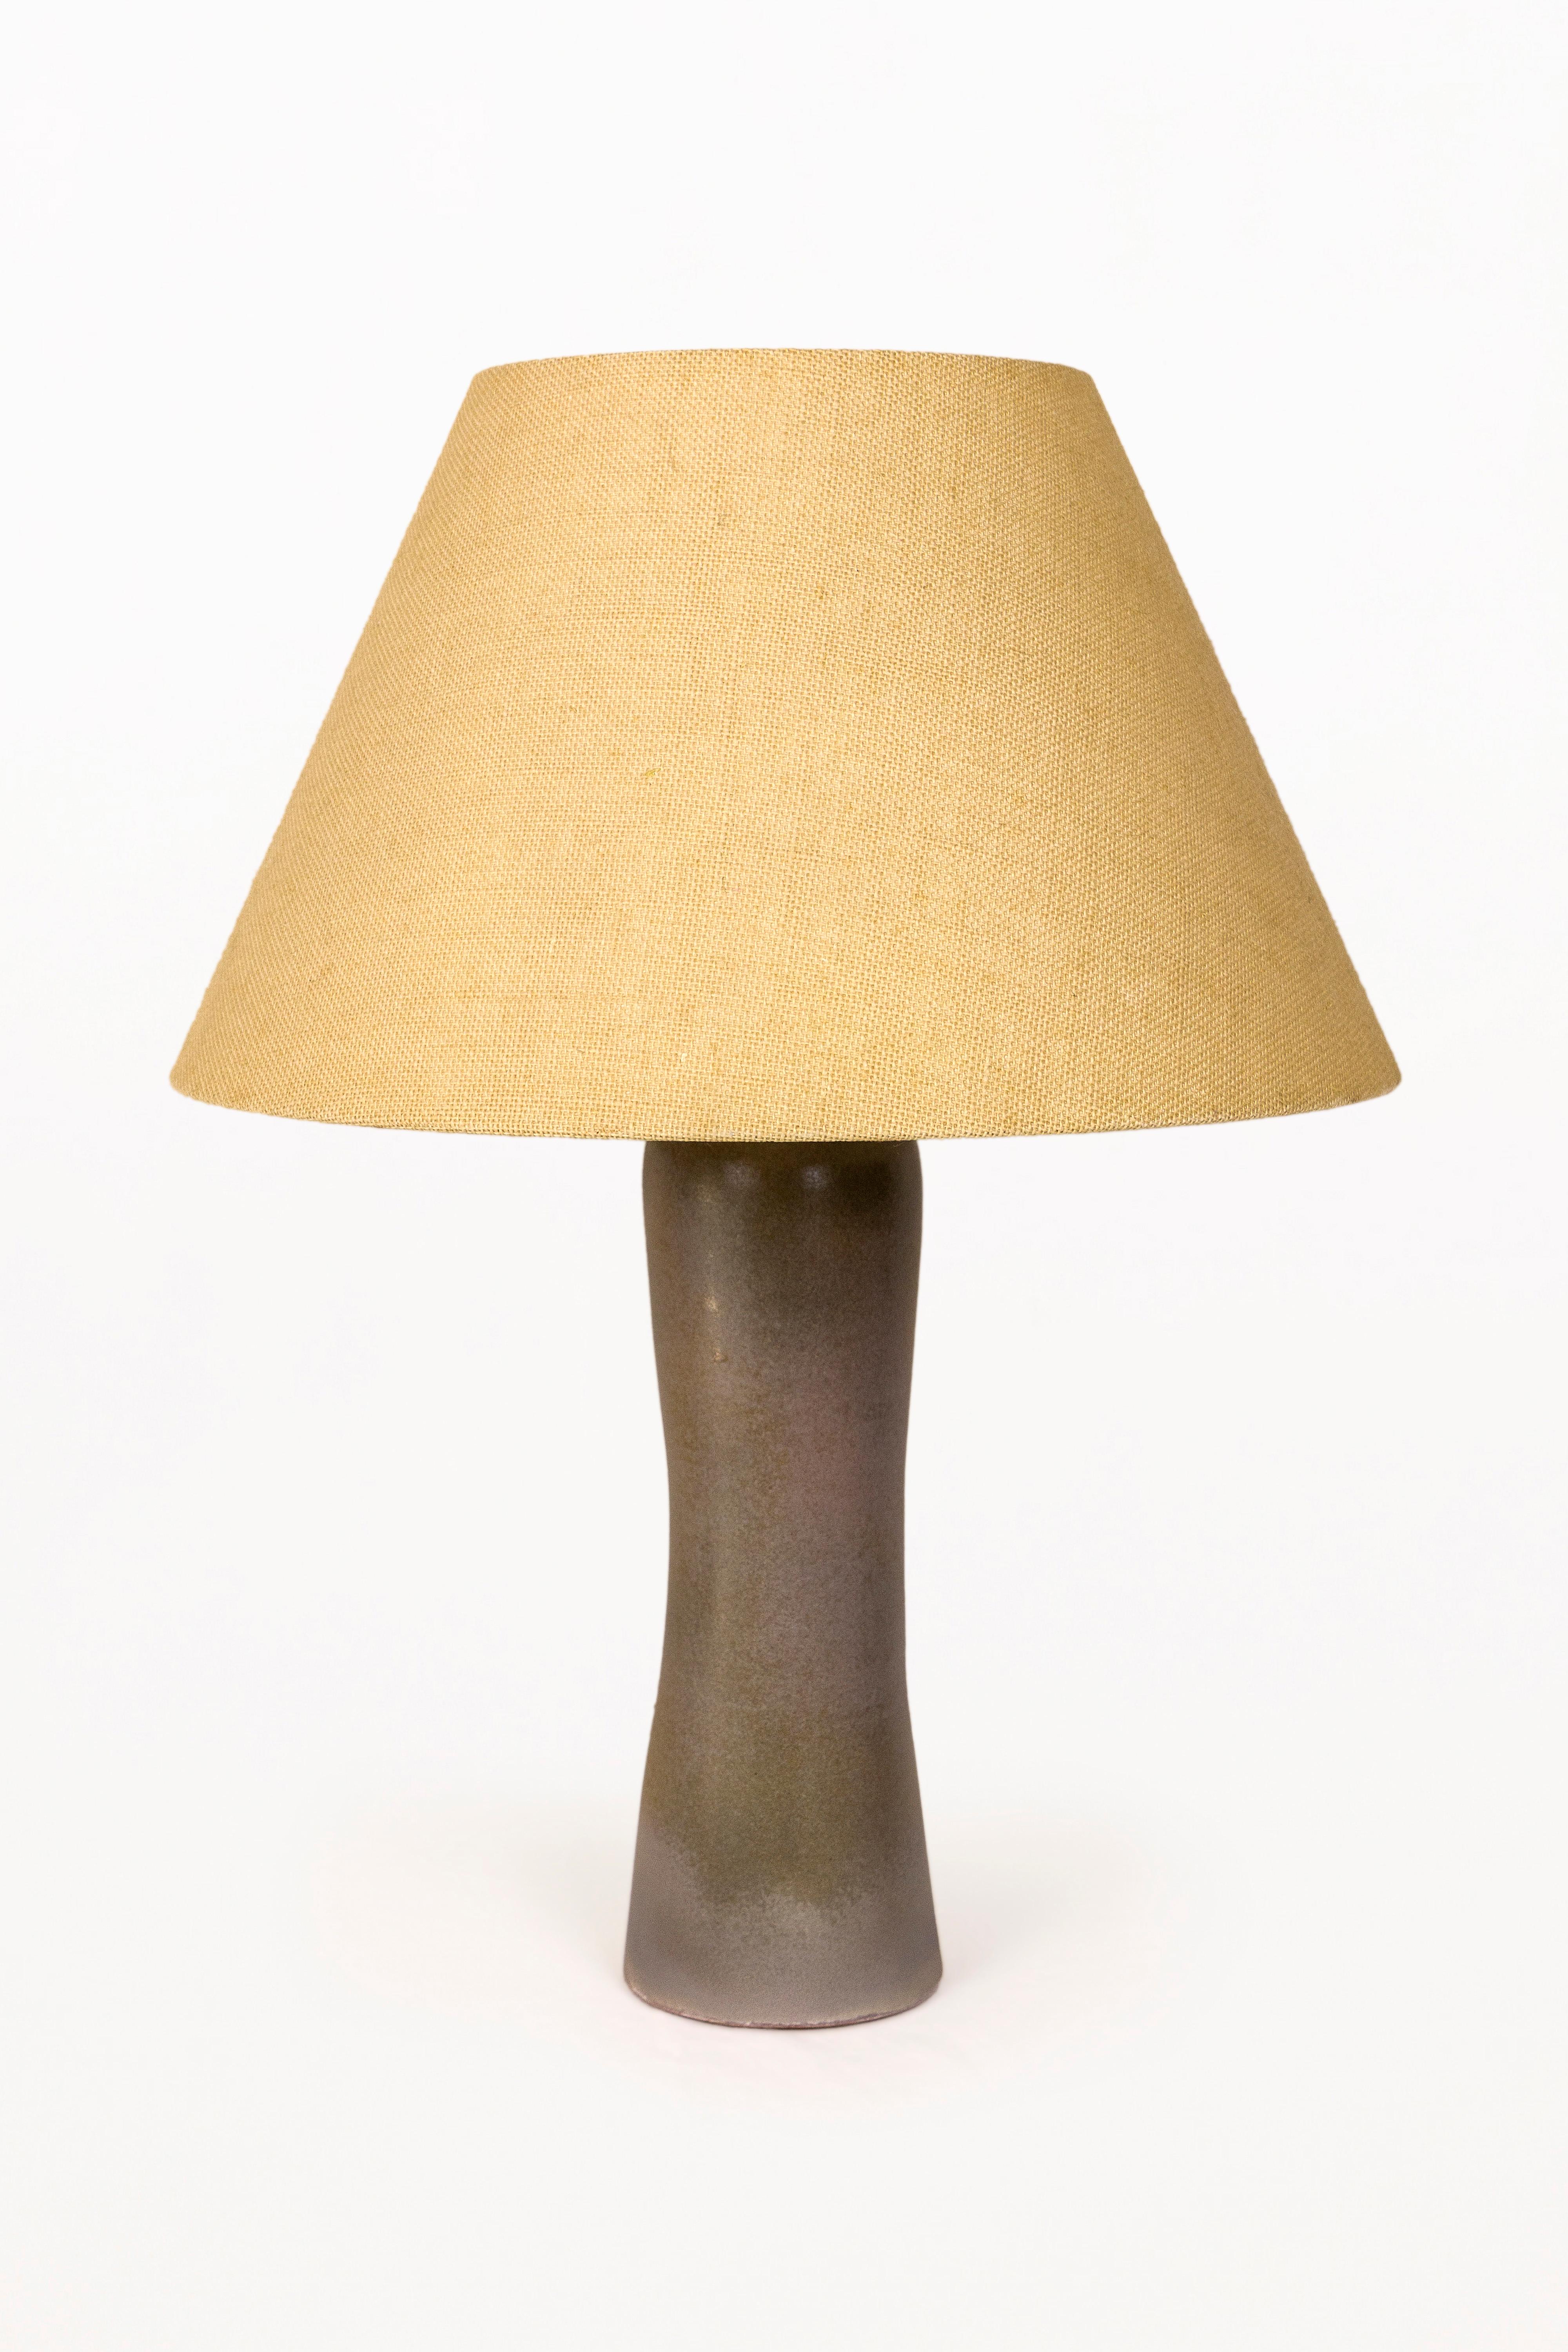 Pair of Serge Castella table lamps for Paco Orti.
Pair of ceramic brown table lamps.
Glazed.
2019, France.
Excellent condition.
While studying fashion in Paris, Serge Castella spent his time wandering around flea markets and the louvre.